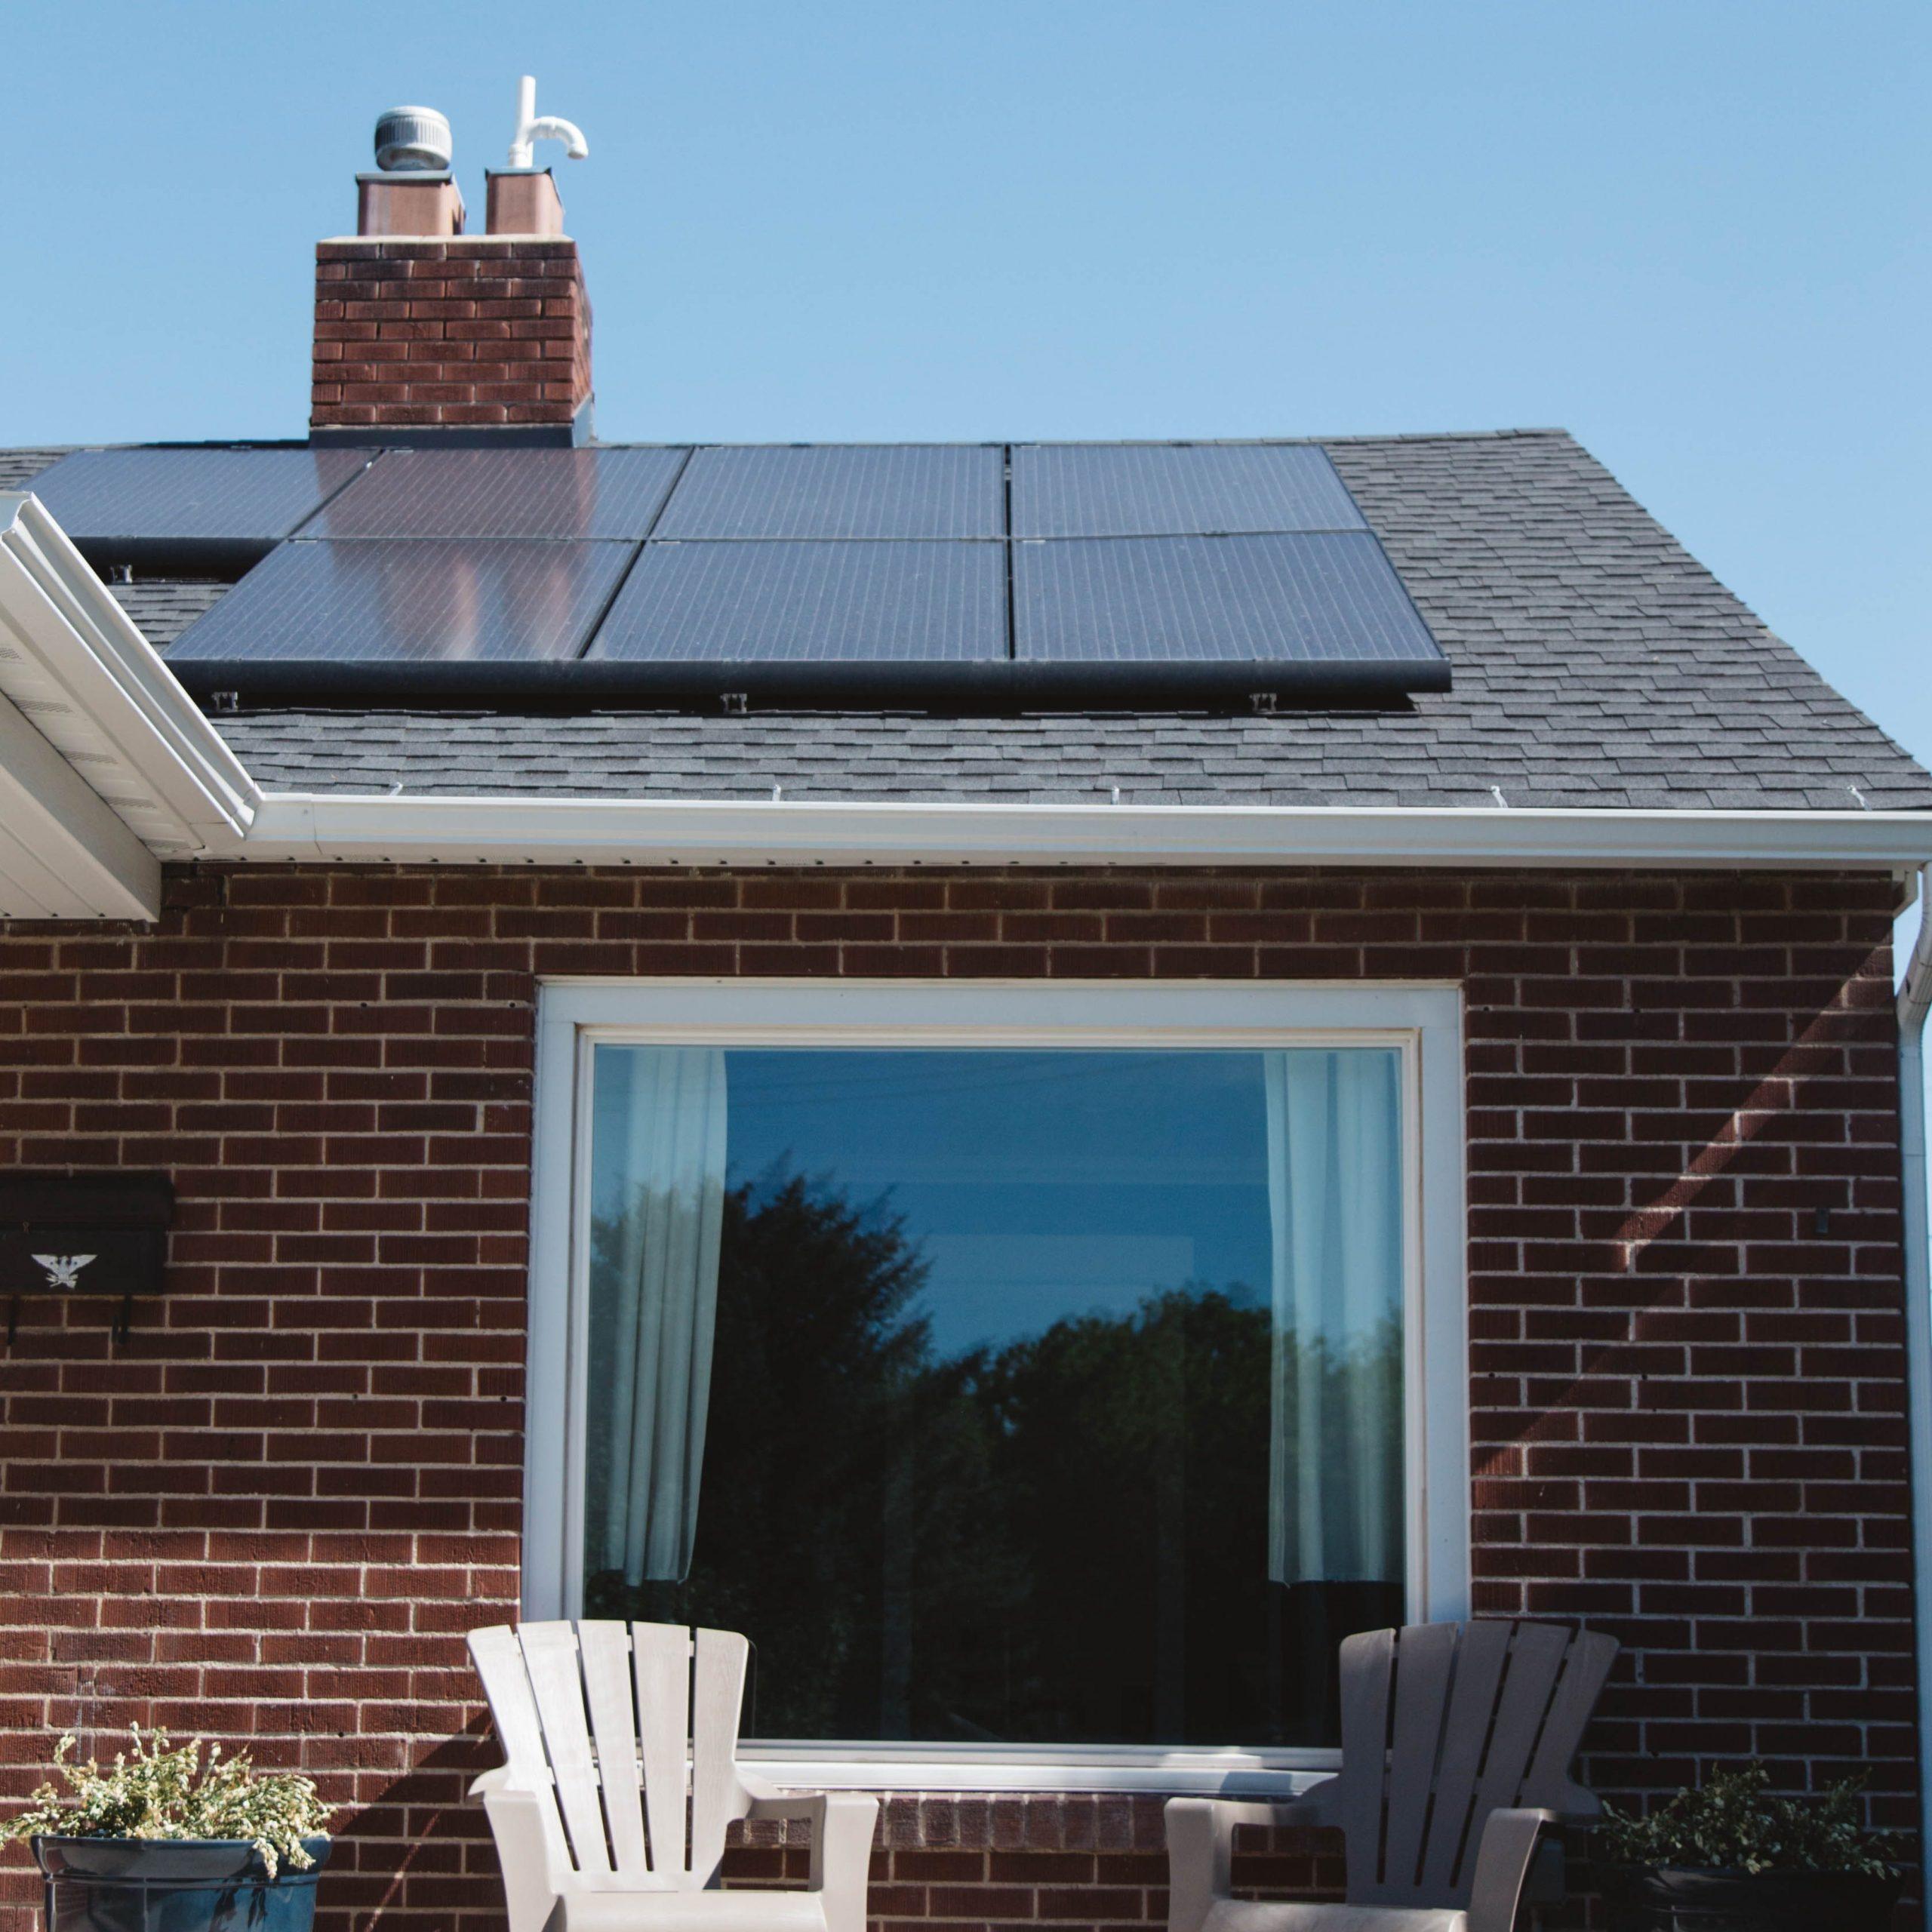 solar panels are good for sustainable housing